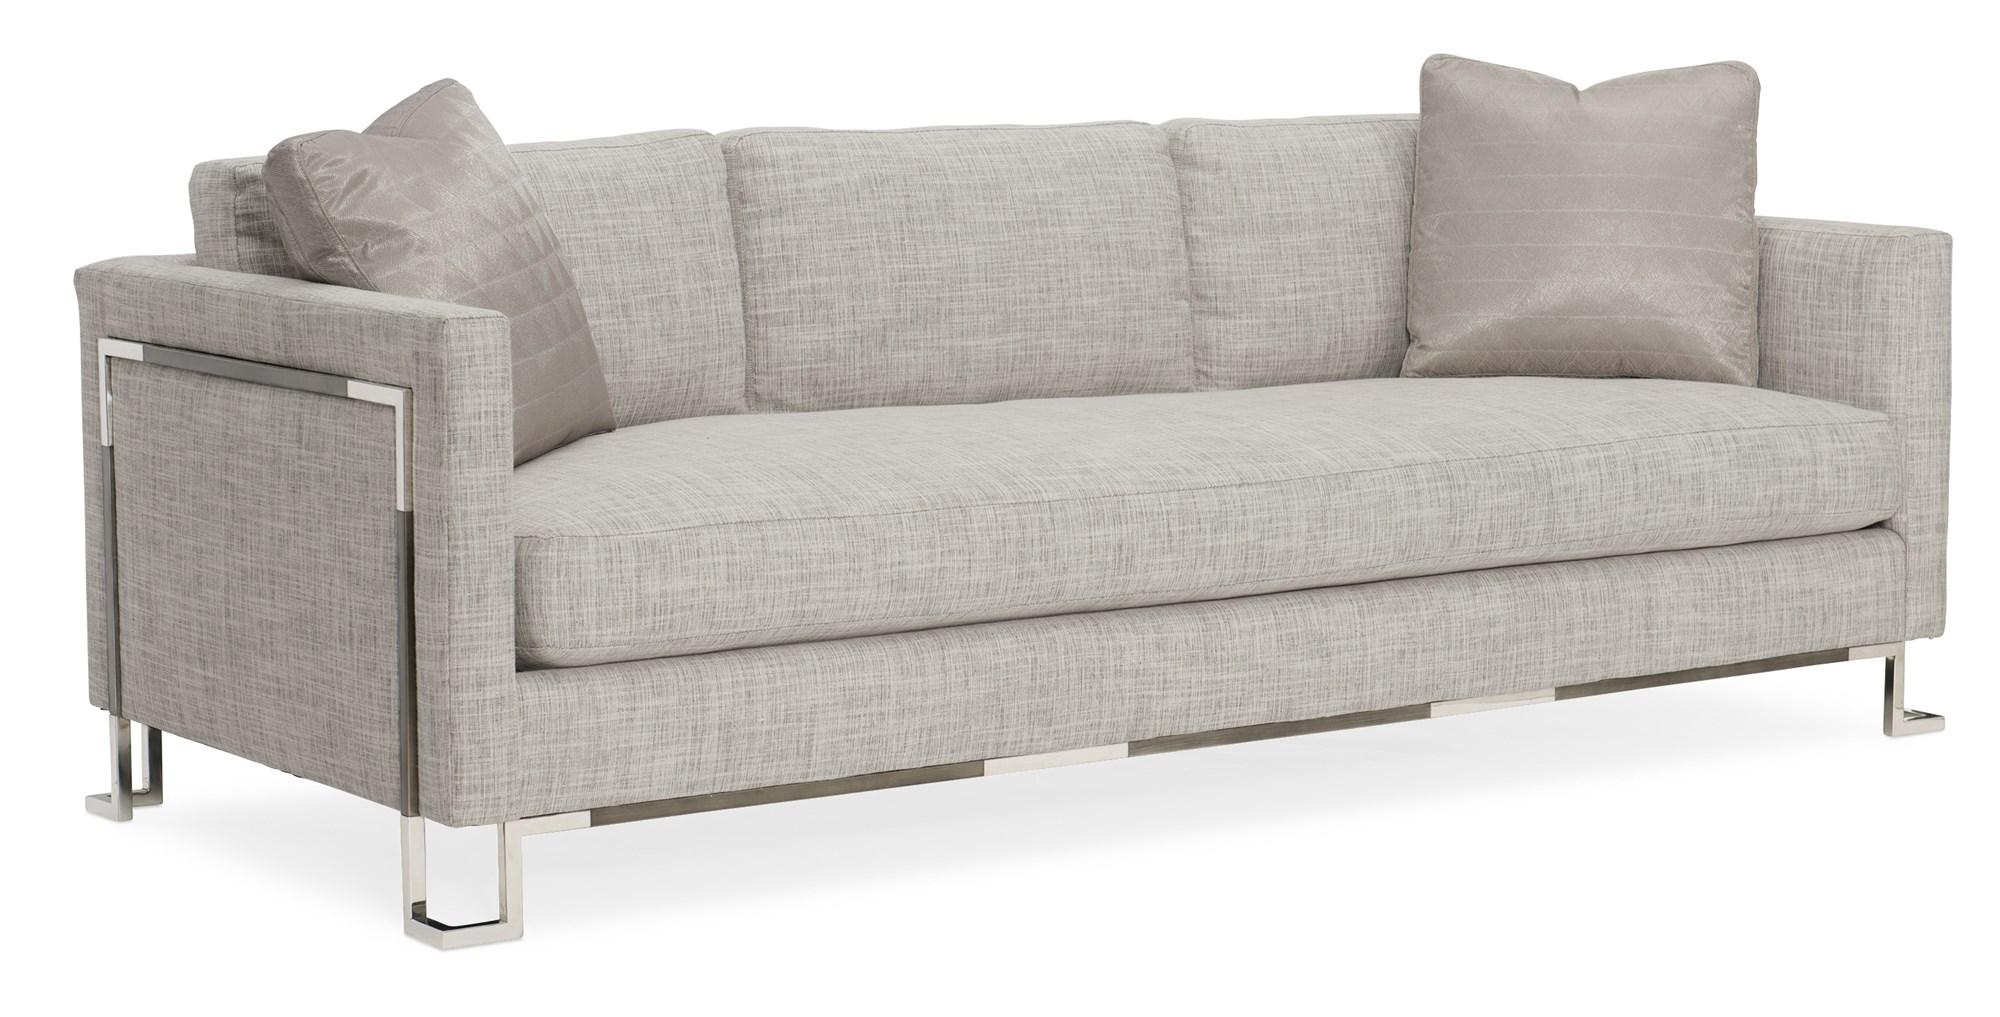 Contemporary Sofa OPEN FRAMEWORK M090-018-012-A in Light Gray, Brown Fabric